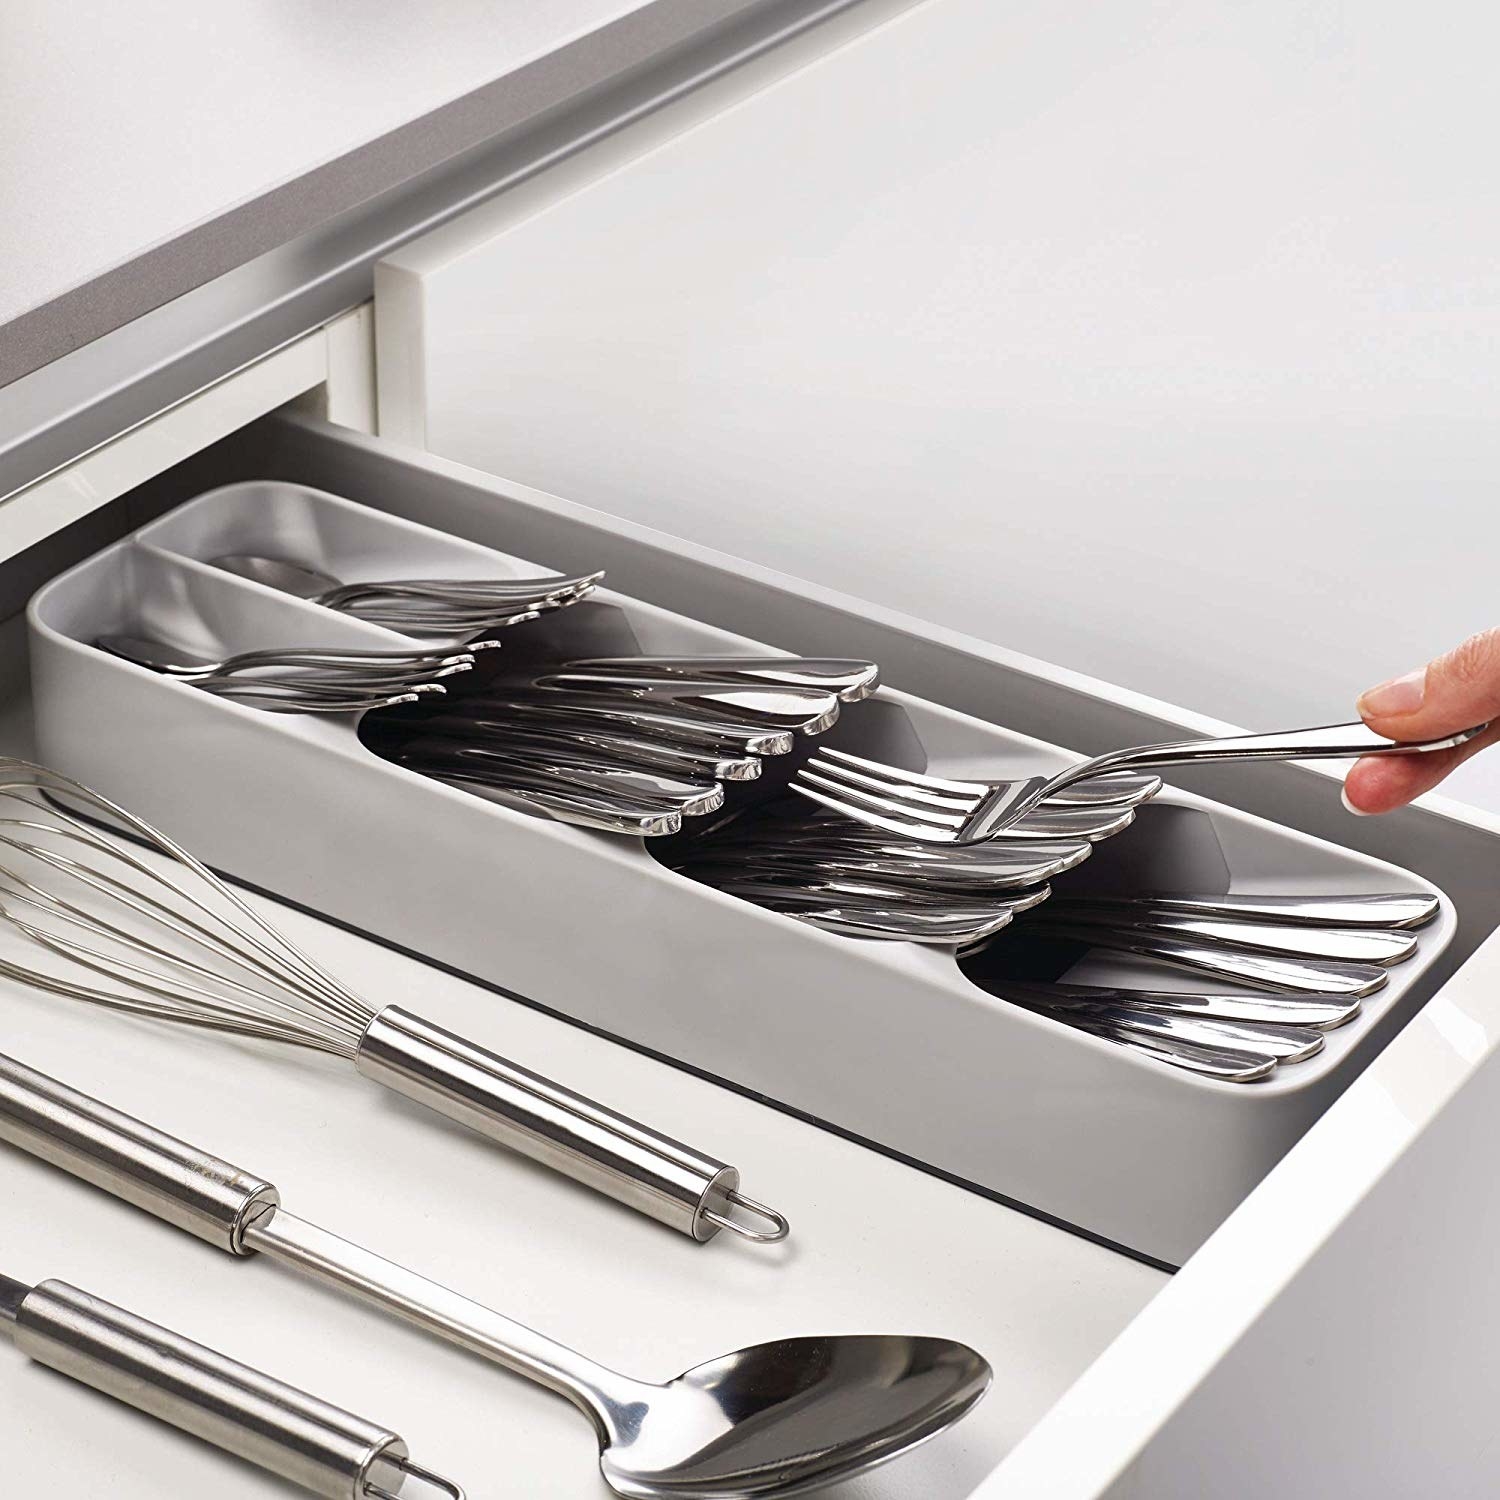 hand putting fork away in organizer, which takes up the full vertical height of the drawer